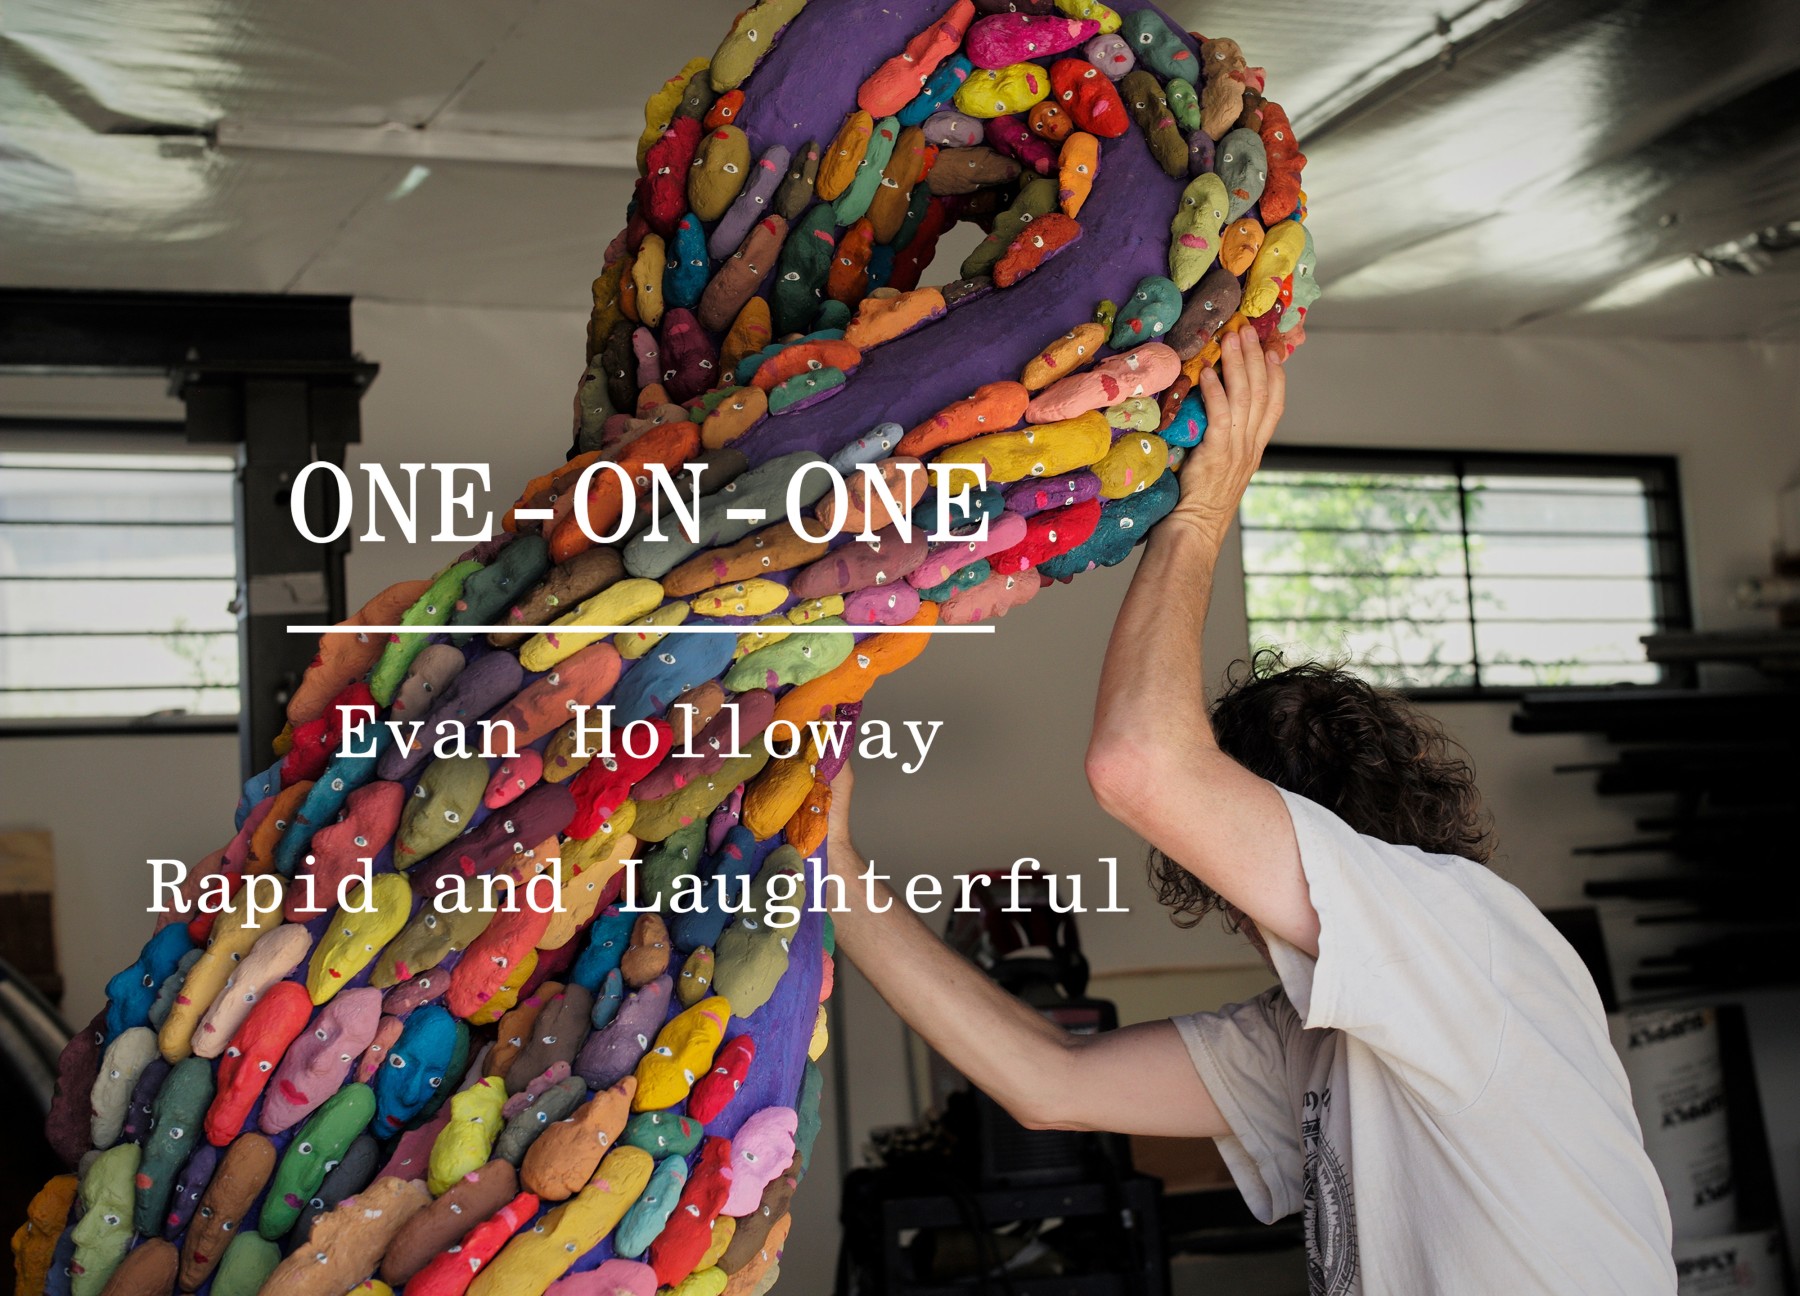 One-on-One: Evan Holloway - Rapid and Laughterful - 线上展厅 - David Kordansky Gallery